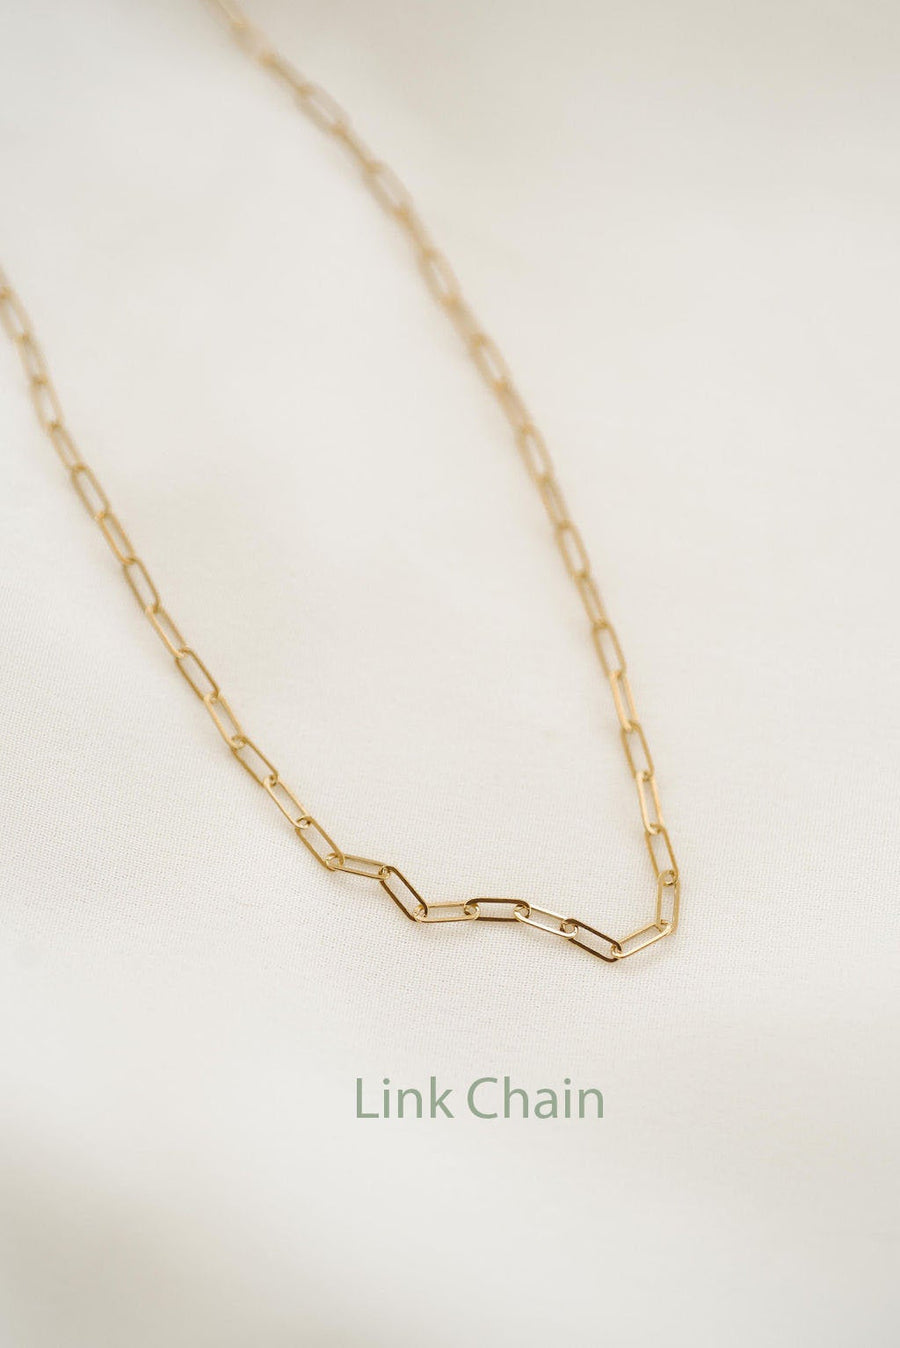 14K Gold-Filled Necklace Chain, Link Chain, Paperclip Chain, Figaro Chain, Rope Chain, Necklace, Choker, Layering Jewelry, Christmas Gift